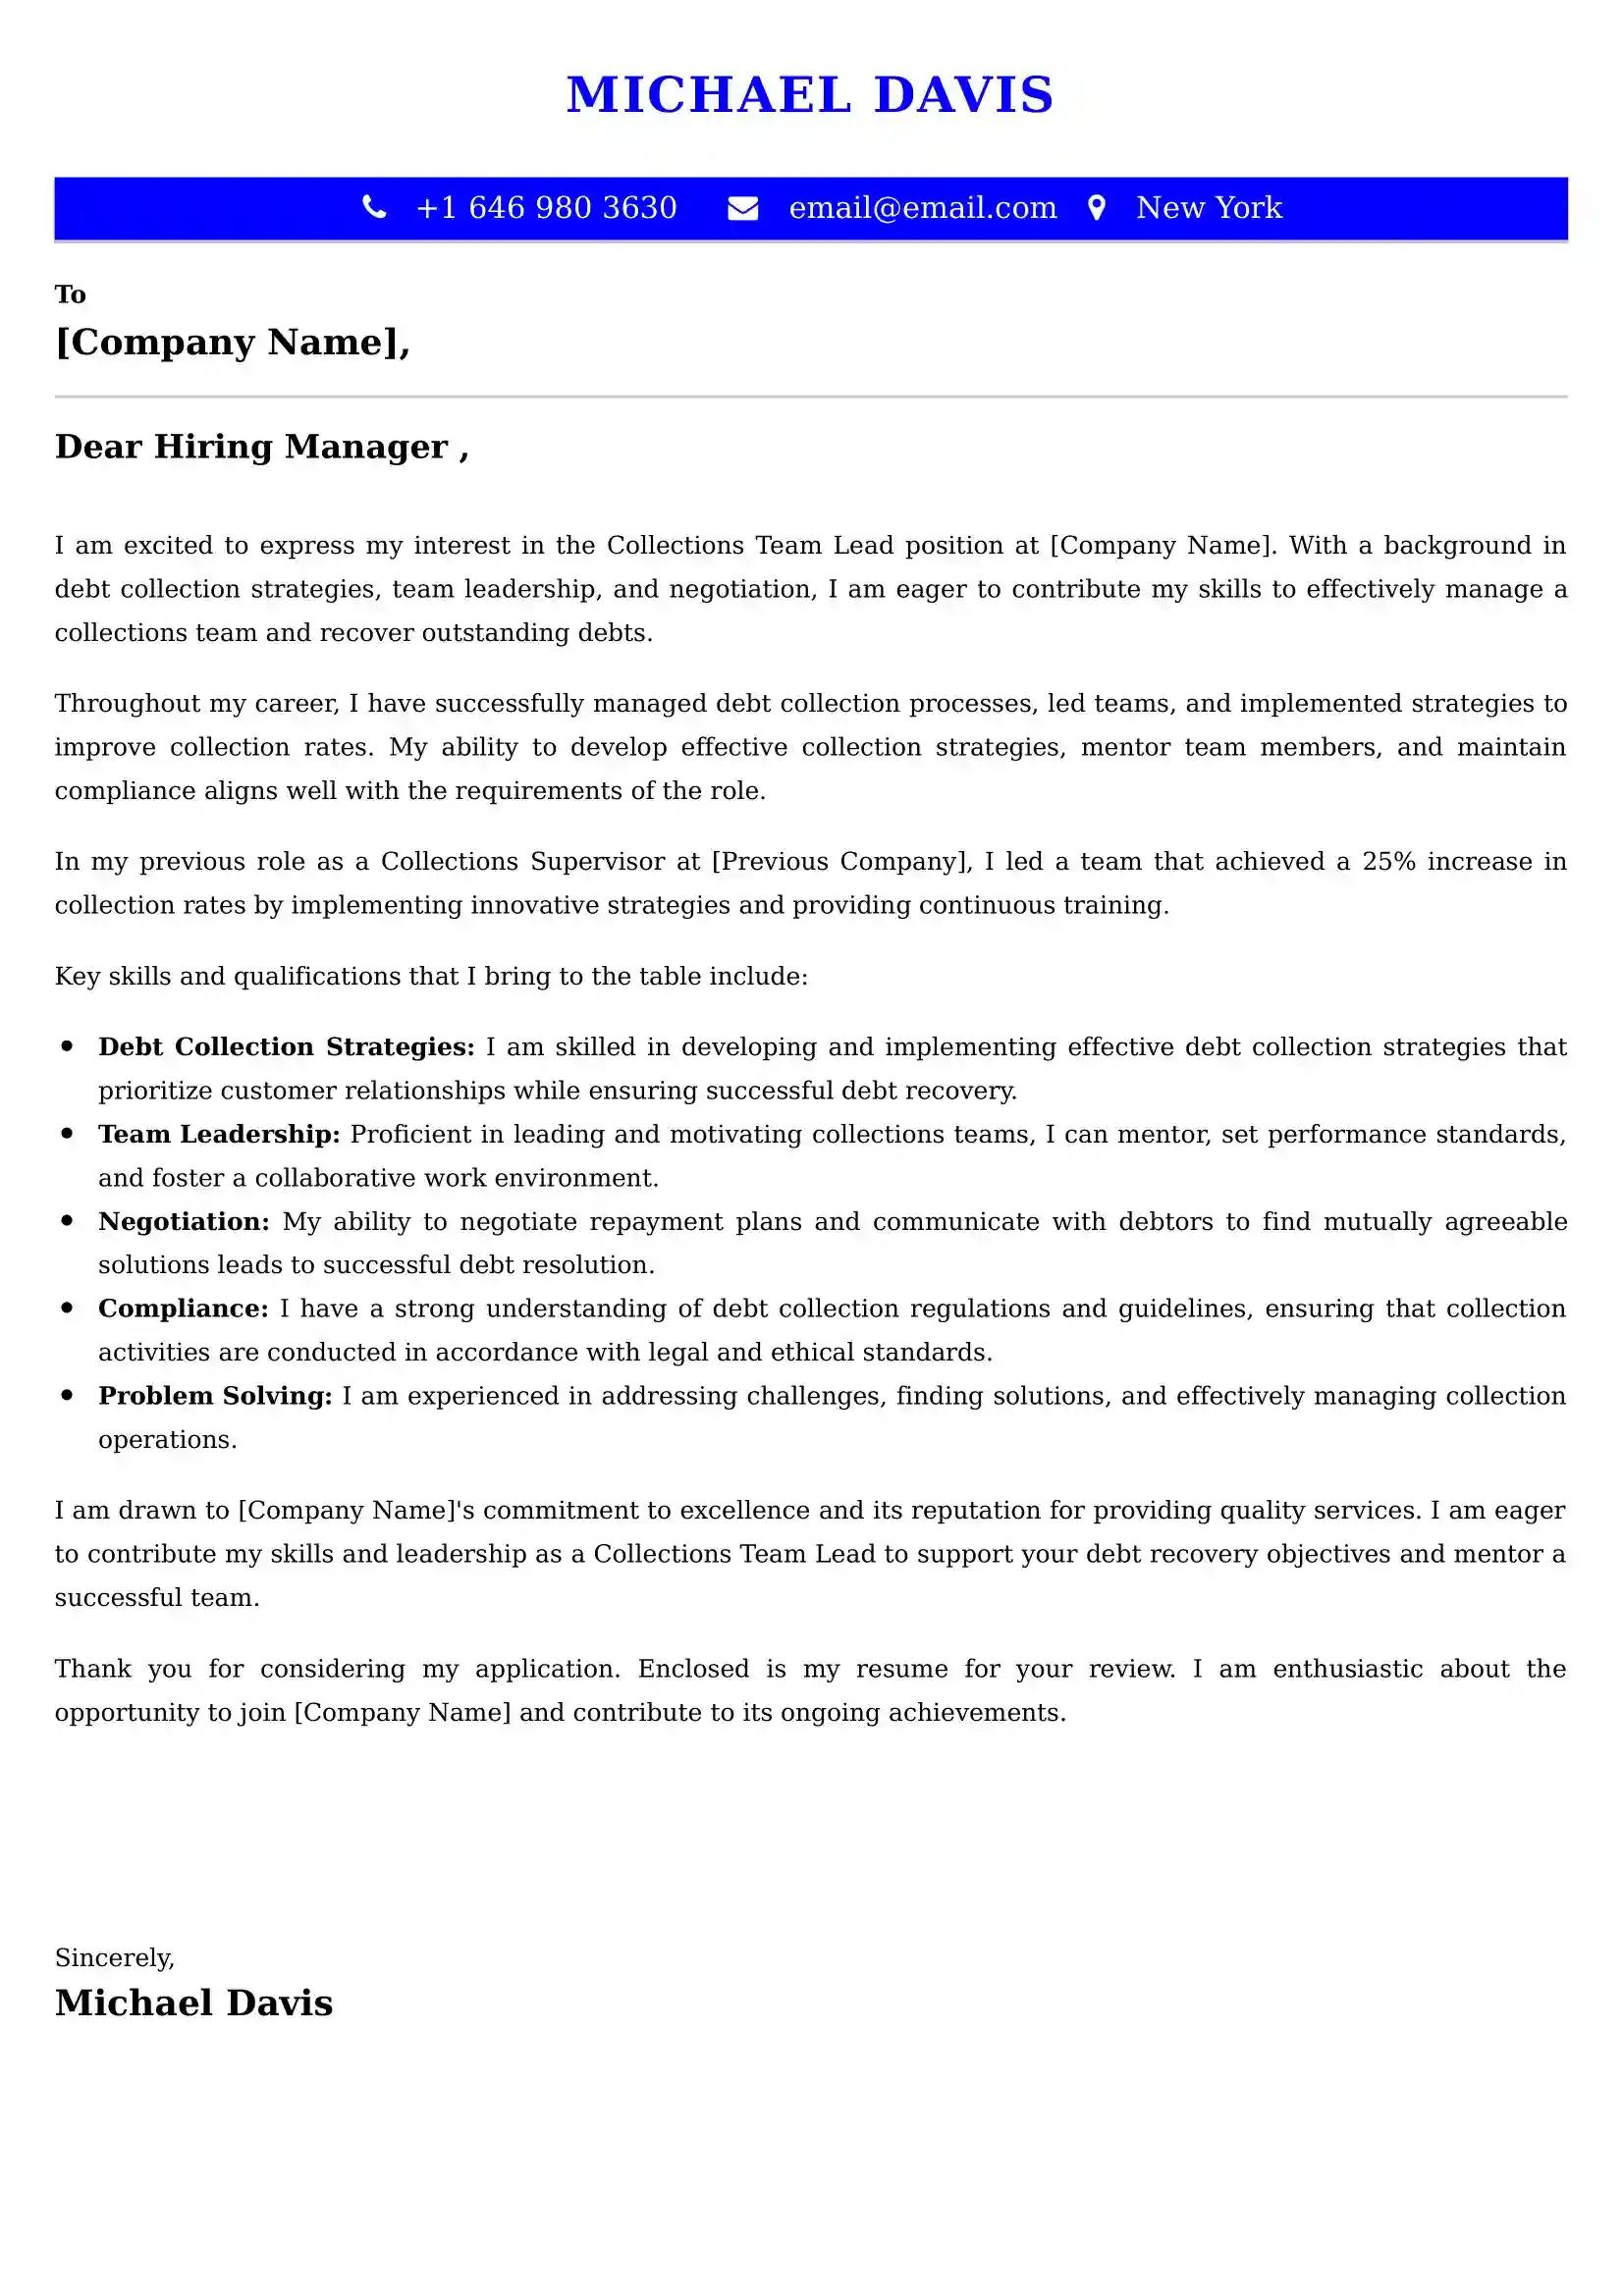 Collections Team Lead Cover Letter Examples -Latest Brazilian Templates